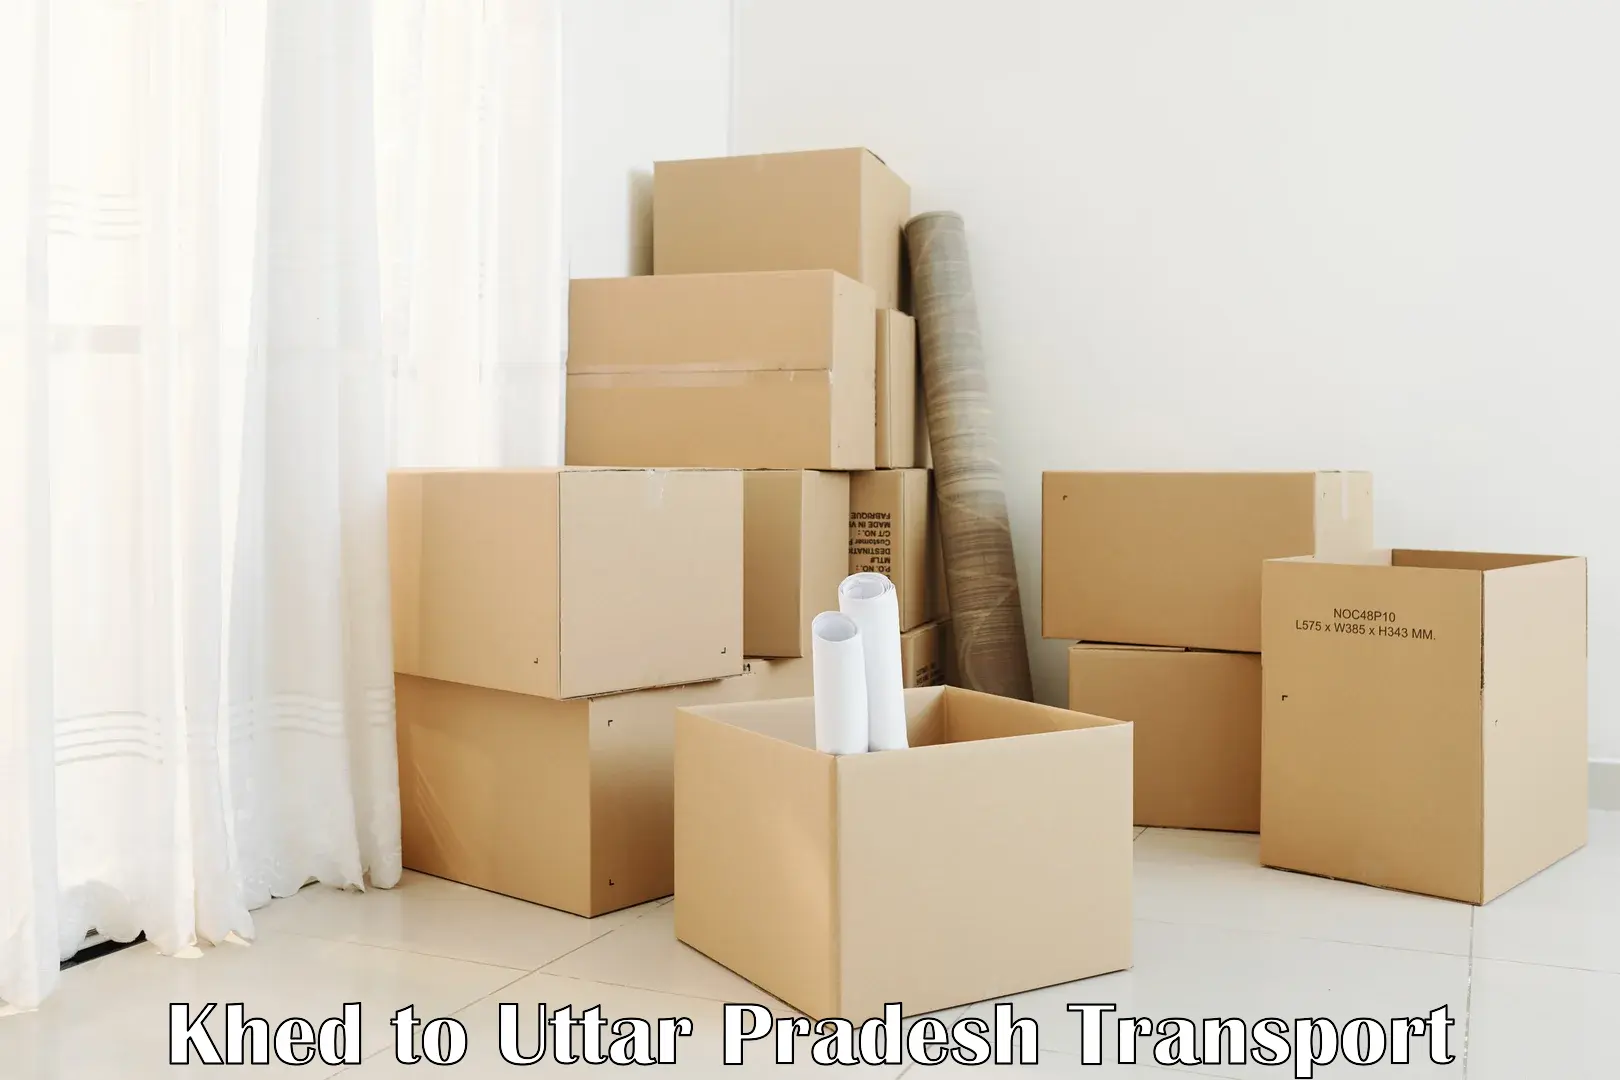 Furniture transport service Khed to Bhadohi